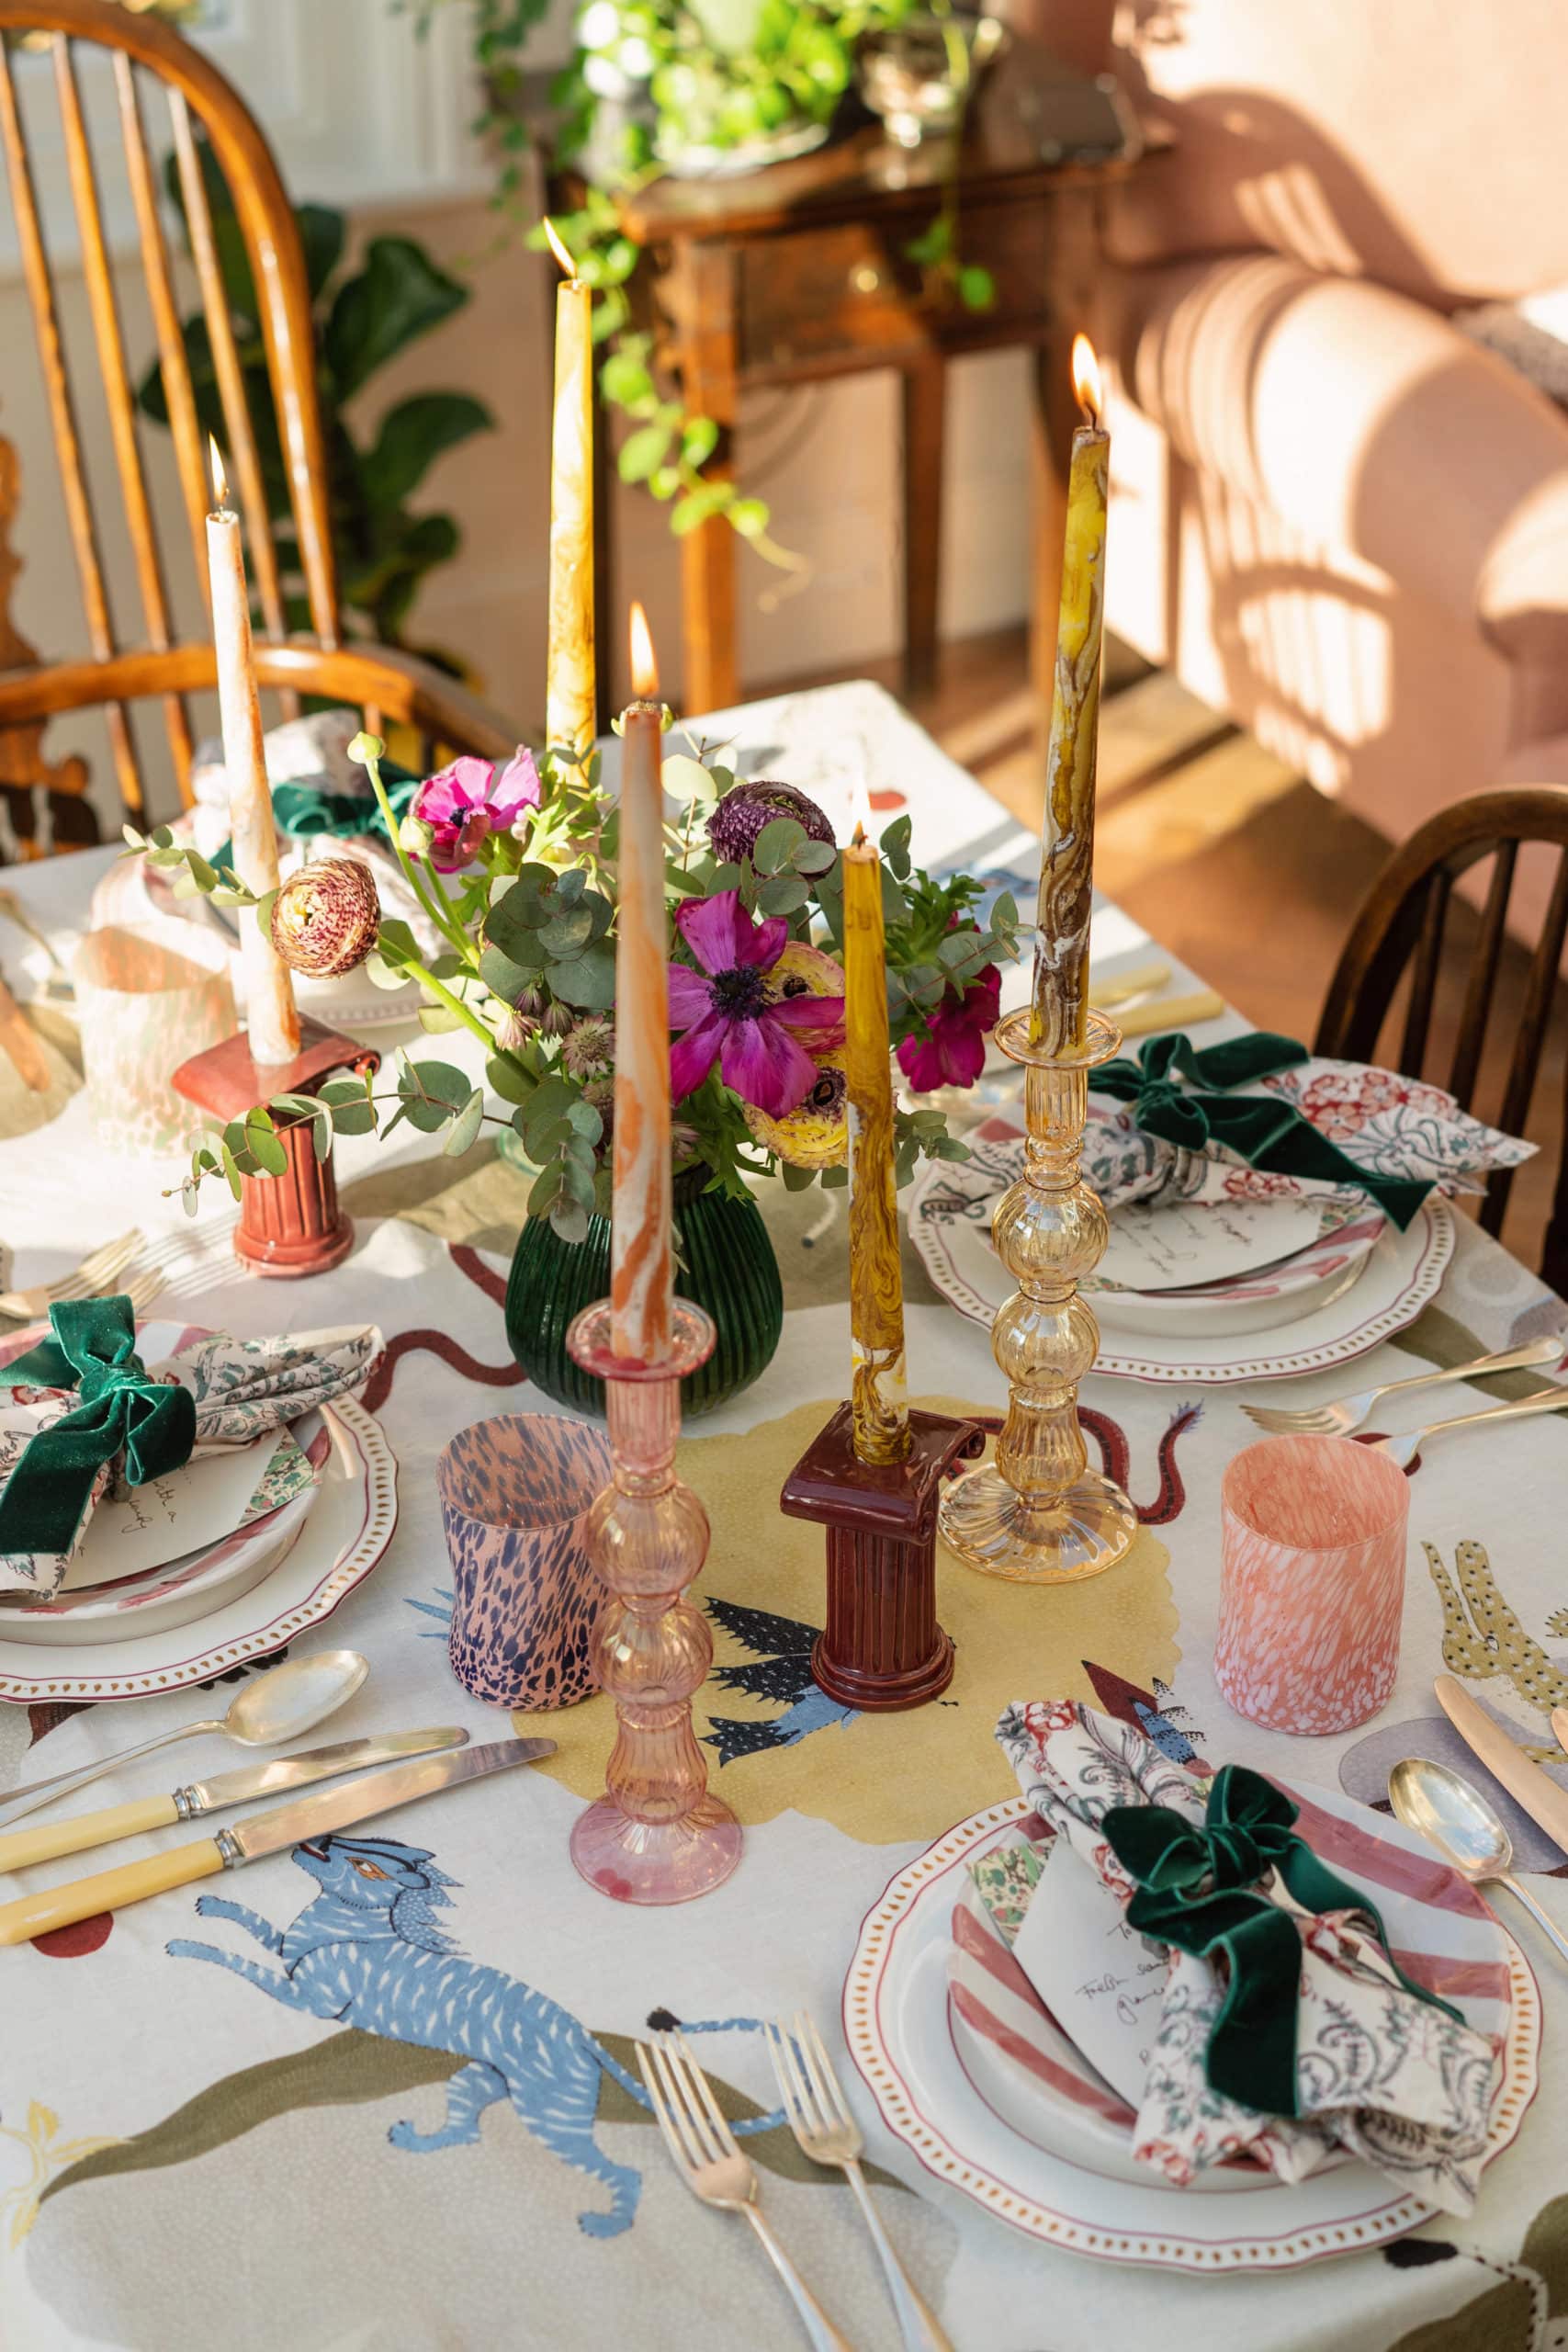 Louise Roe of Front Roe and planning a spring table